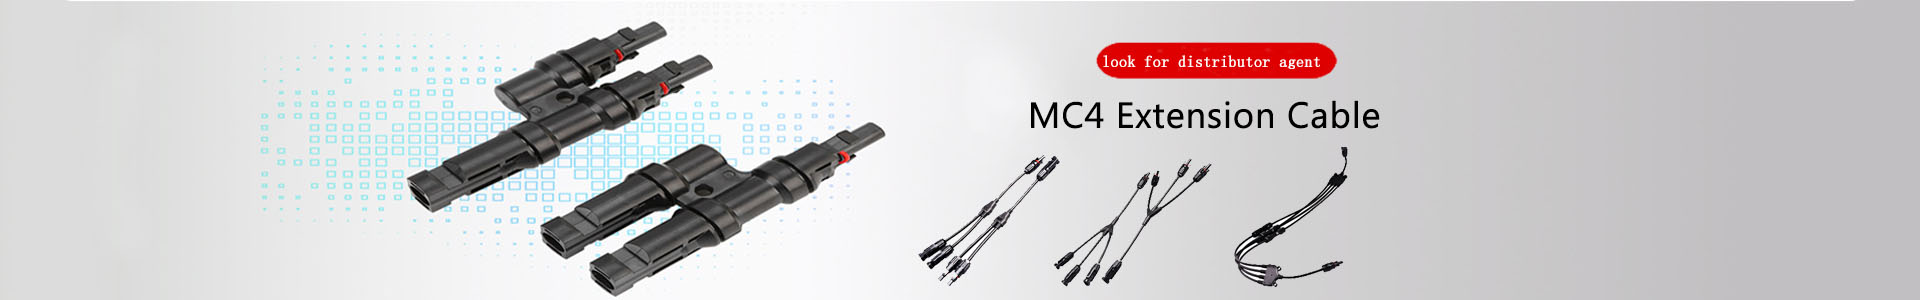 Mc4 connector for solar panel-Solar Connector-Solar | solar connector,solar branch connector,diode fuse connector,MC4 extnsion cable,H1Z2Z2 solar cable, UL4703 solar cable | Leading manufacturer and supplier of solar pv cables and connectors